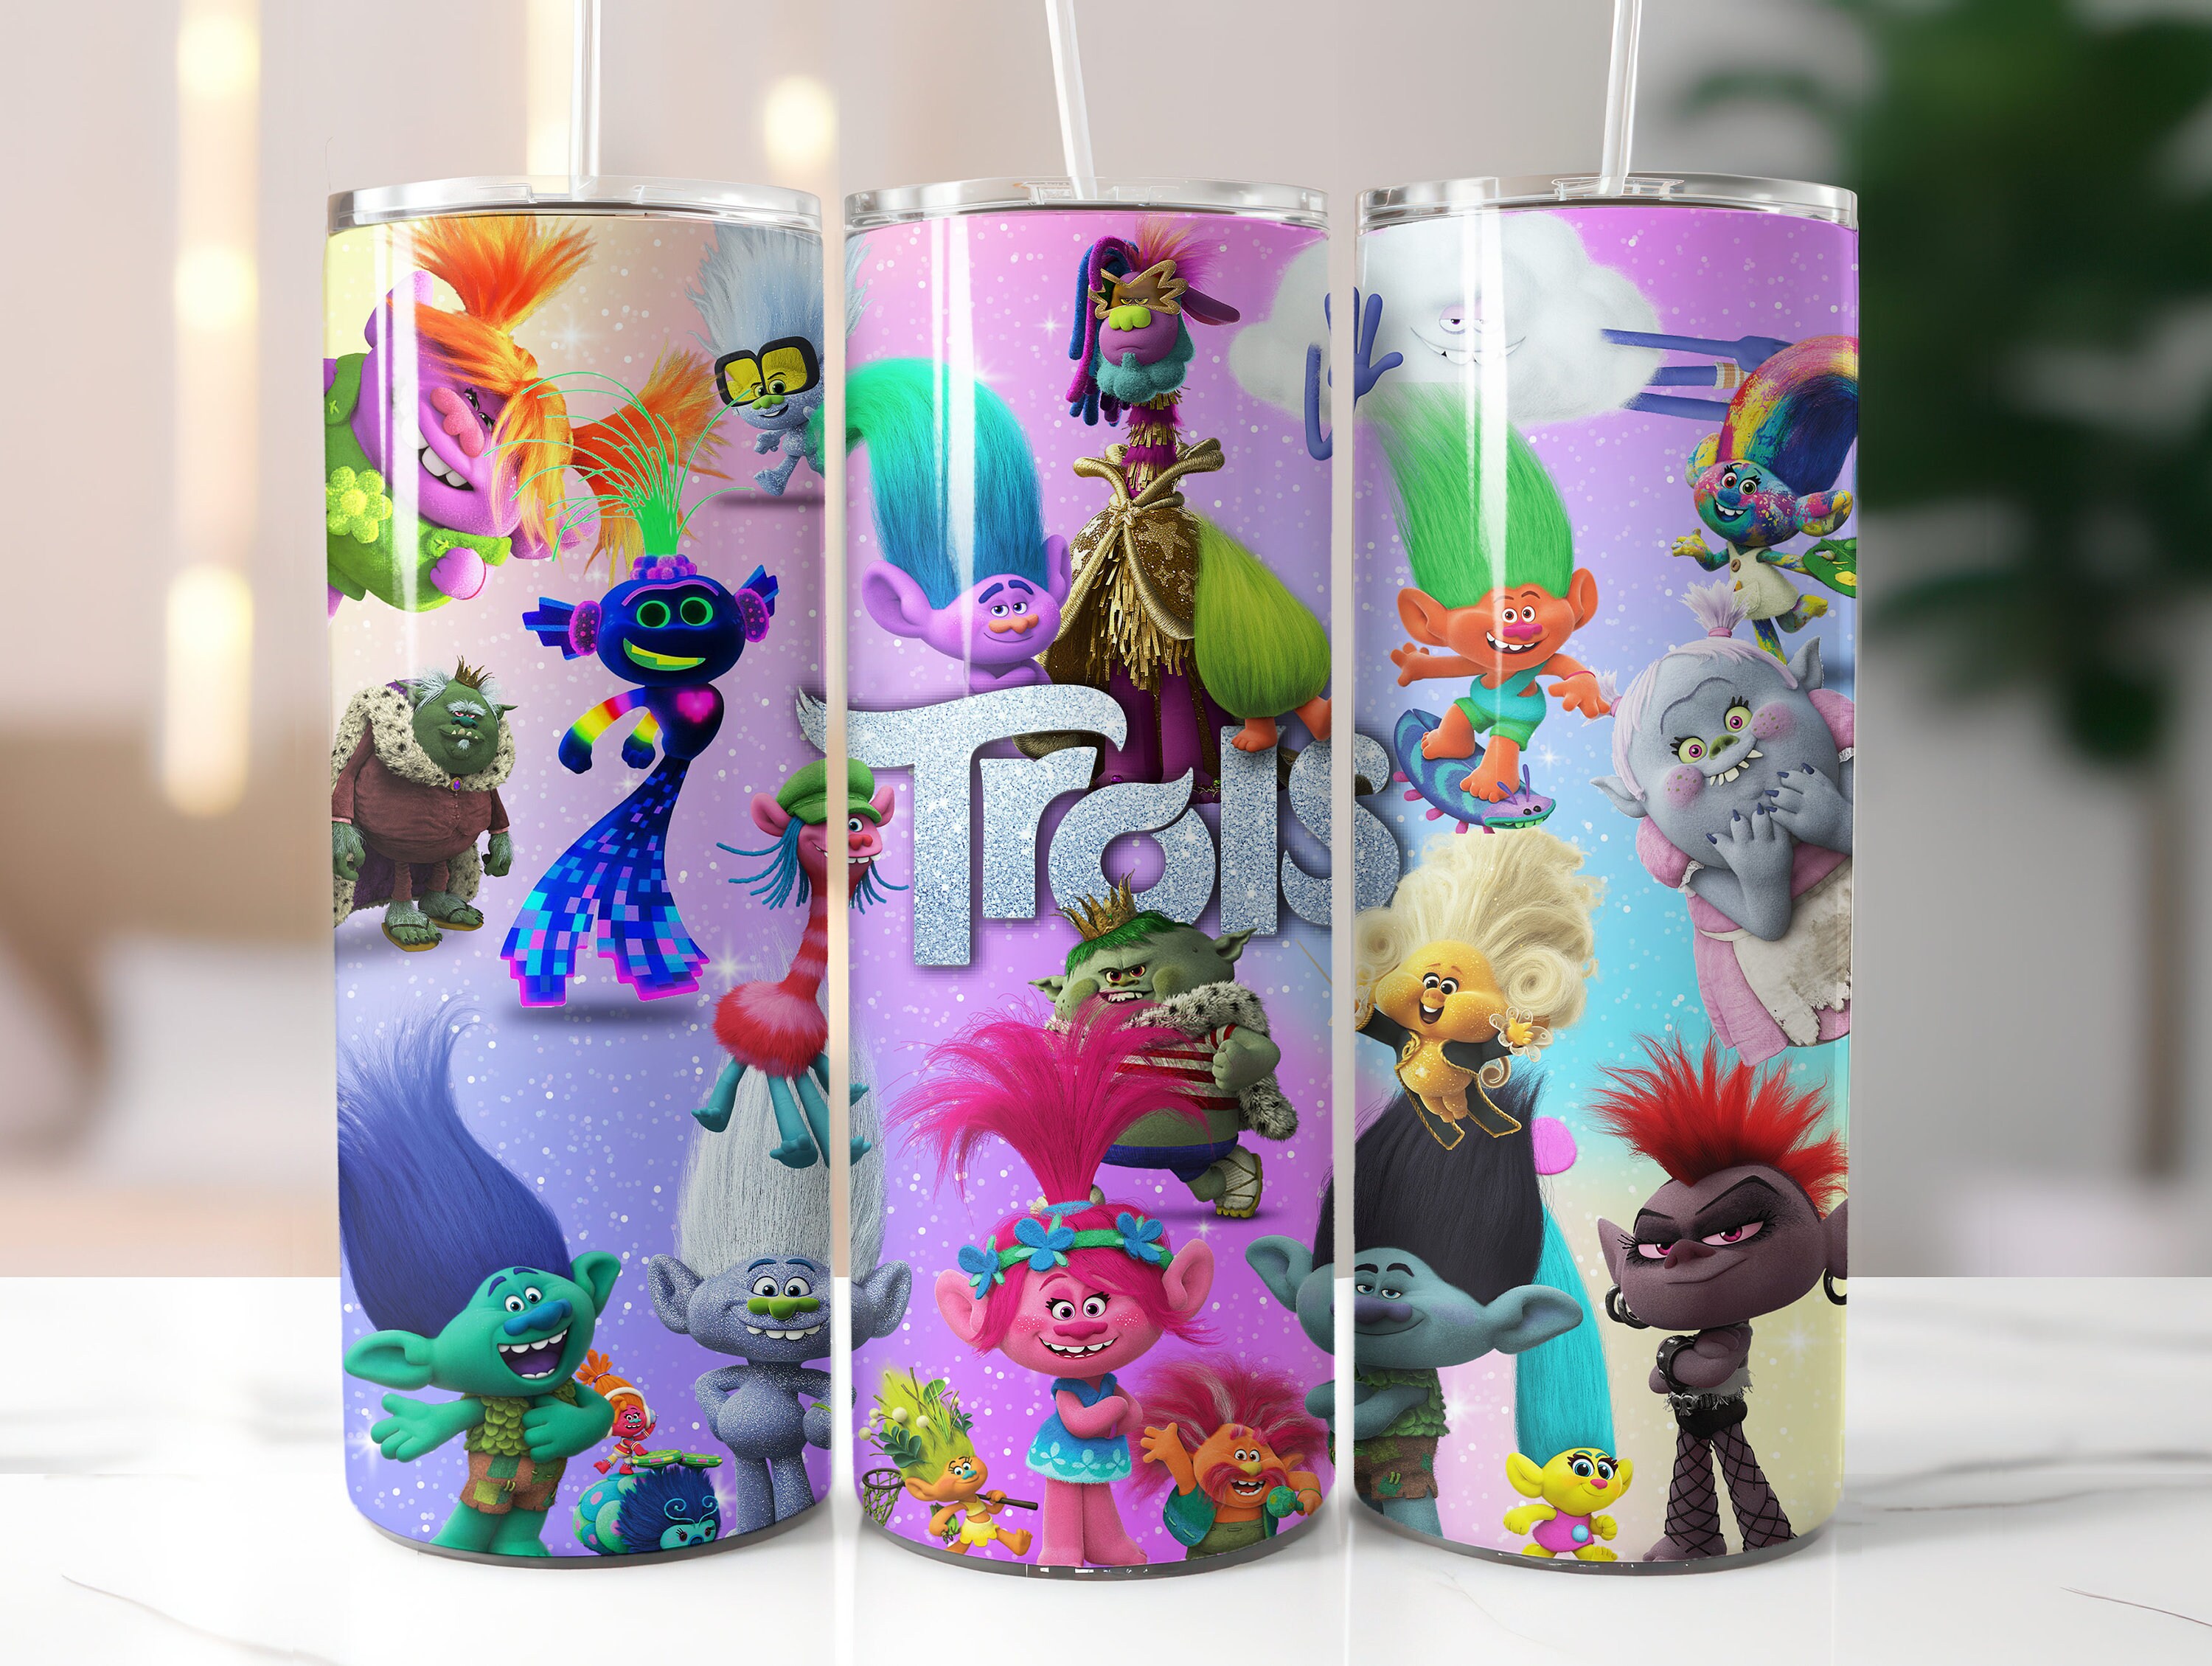 Trolls Party Decor Supplies Tableware Balloons Napkins Plates Tablecover  Banner Cups Invitation Cards Straws 